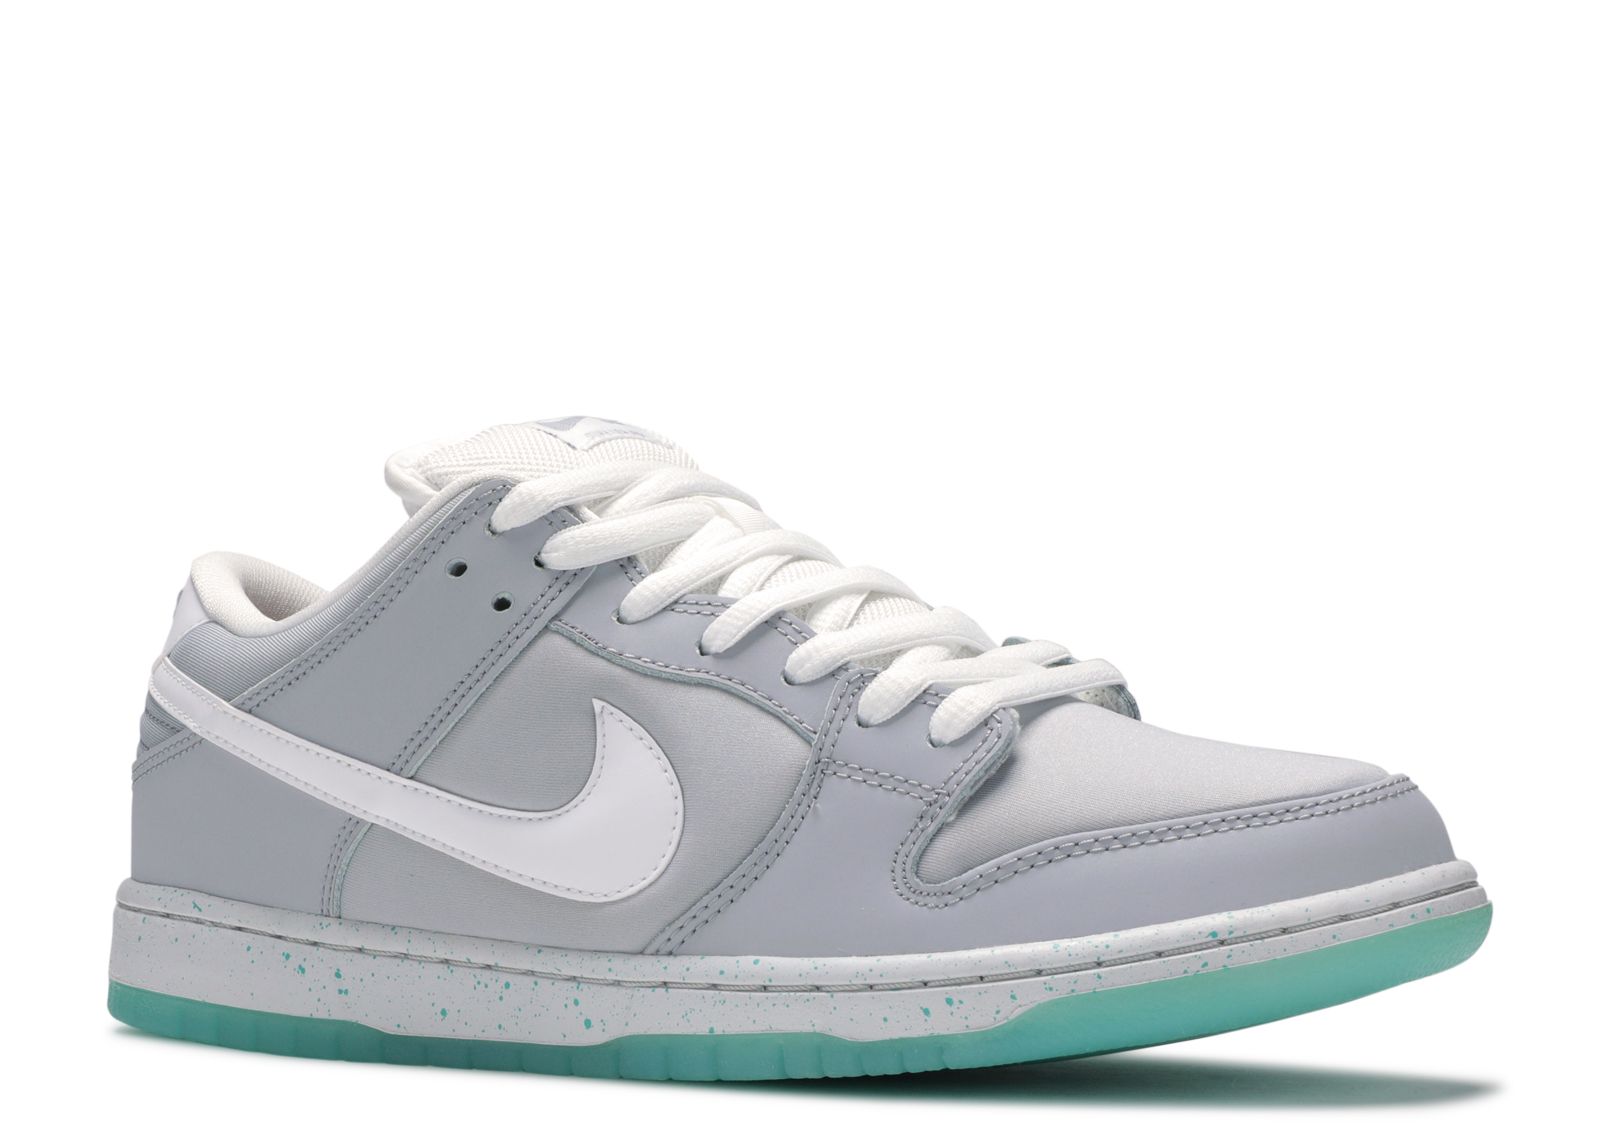 SB Dunk Low 'Marty McFly' - Nike 